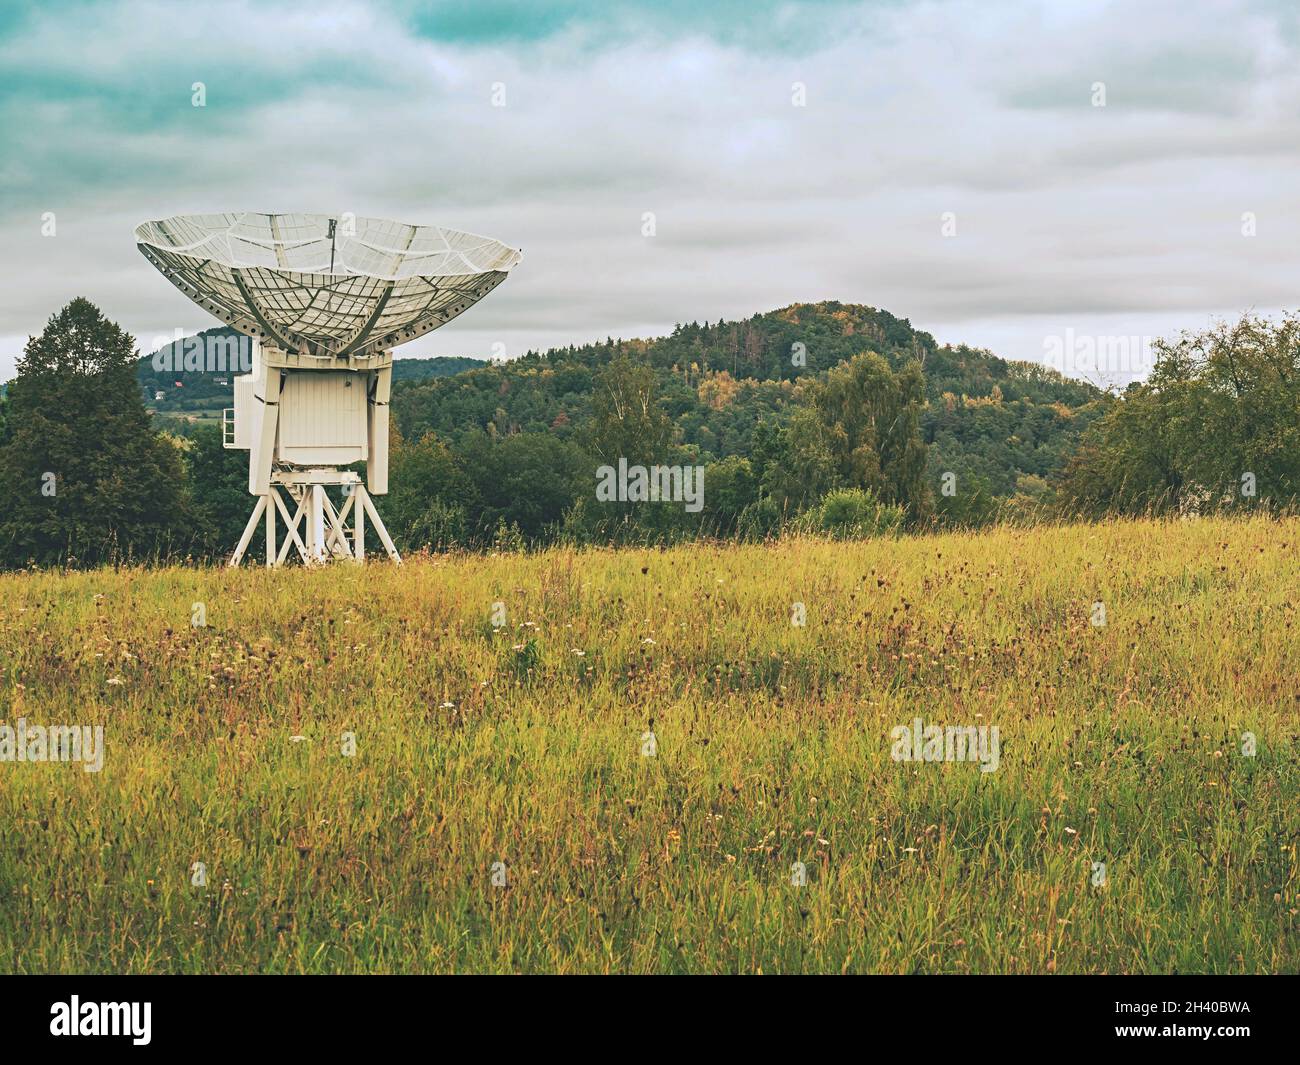 Large radio telescope is situated under green hills against cloudy sky Stock Photo